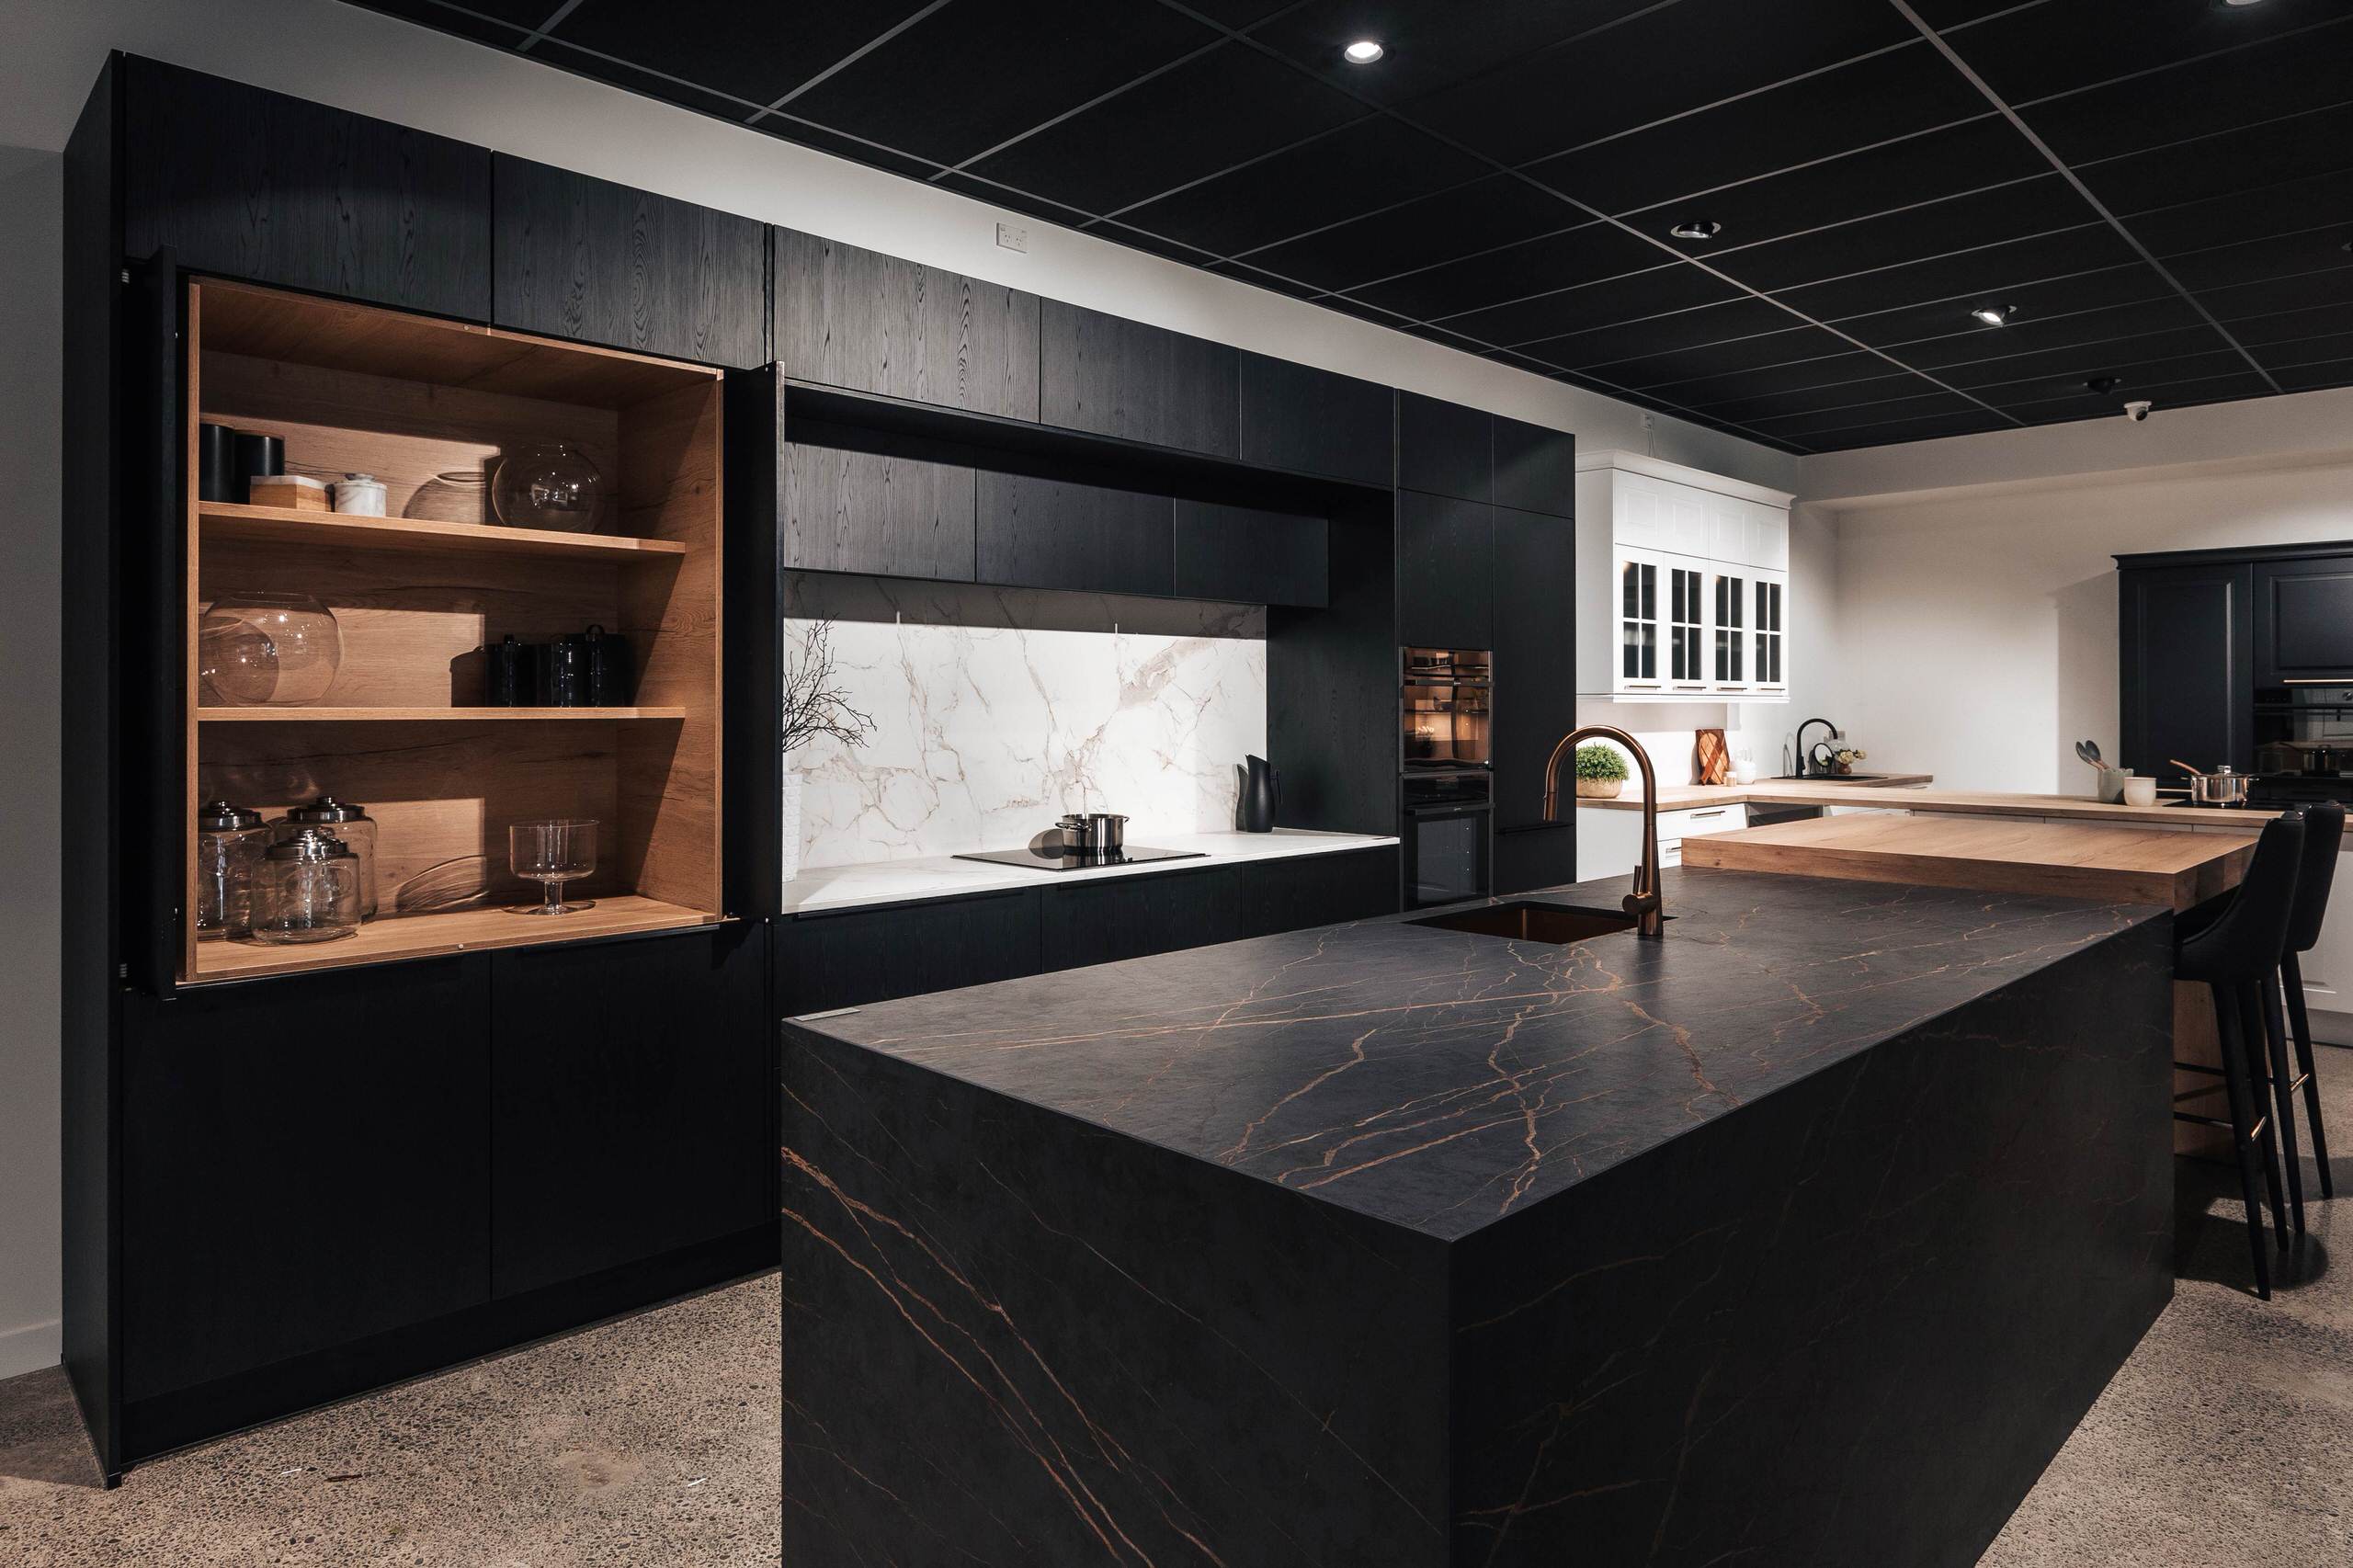 Textured laminate: Nero Oak by Nobilia nicely Paired with Dekton on the bench and island.